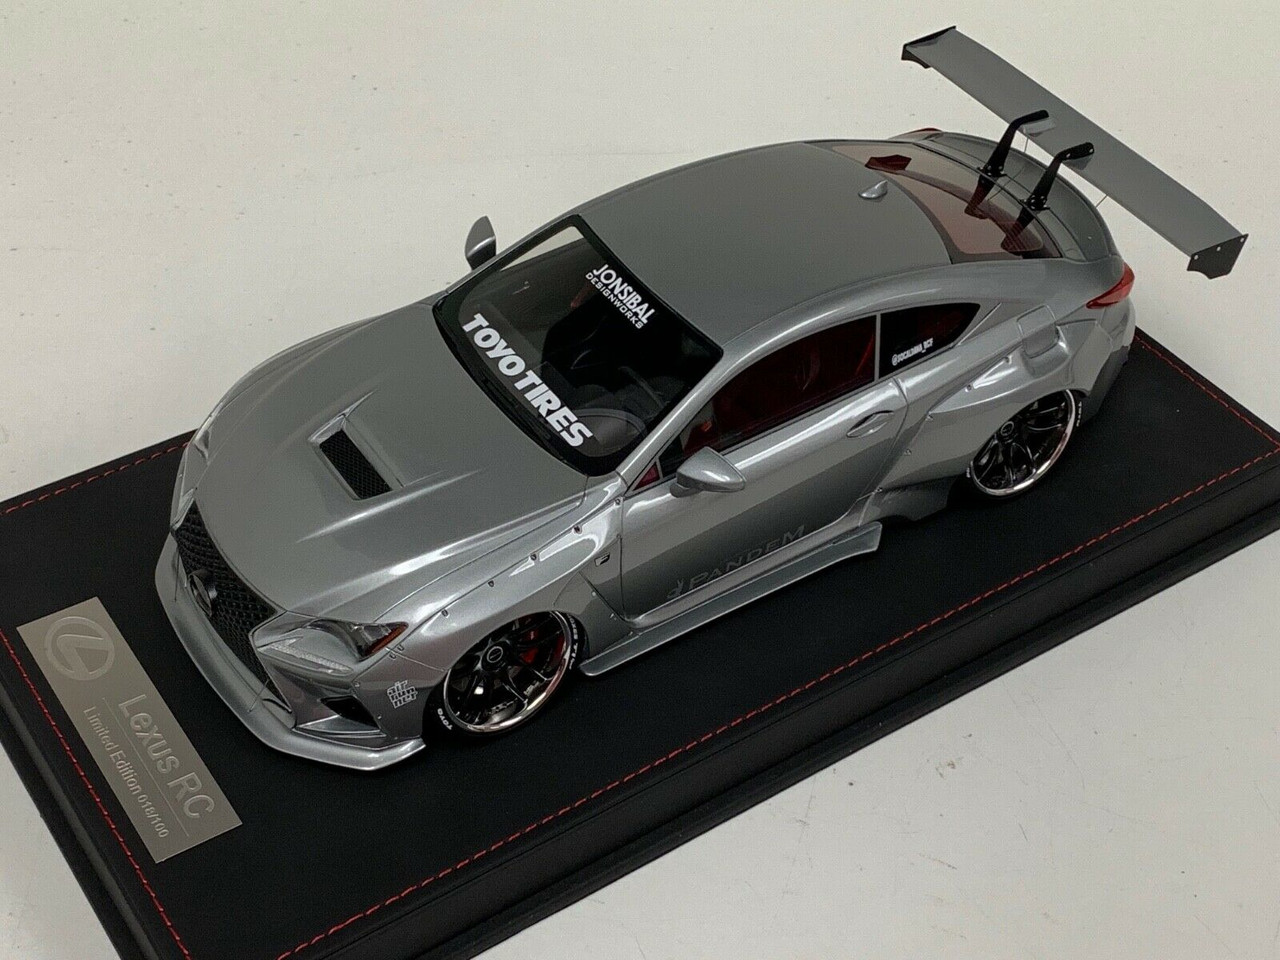 1/18 Dealer Edition Lexus RC F RCF Pandem Liberty Walk (Silver with Black Wheels) Resin Car Model Limited 100 Pieces